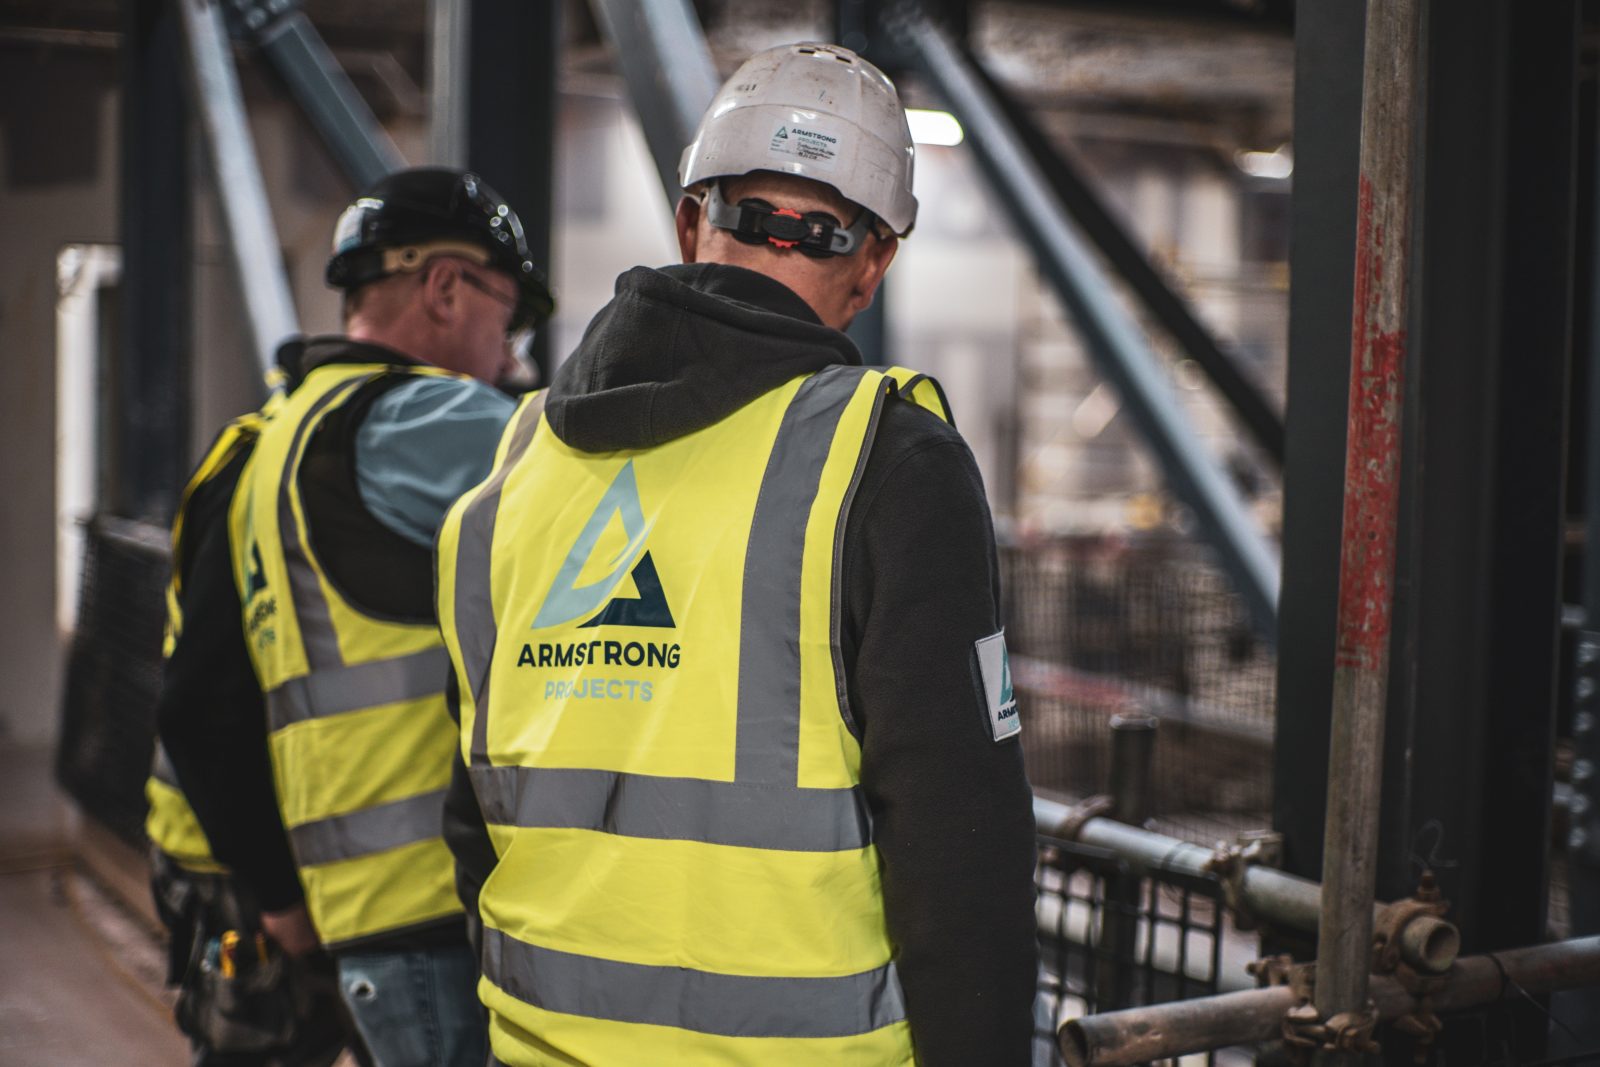 Armstrong Projects: The company changing the way Manchester does construction, The Manc